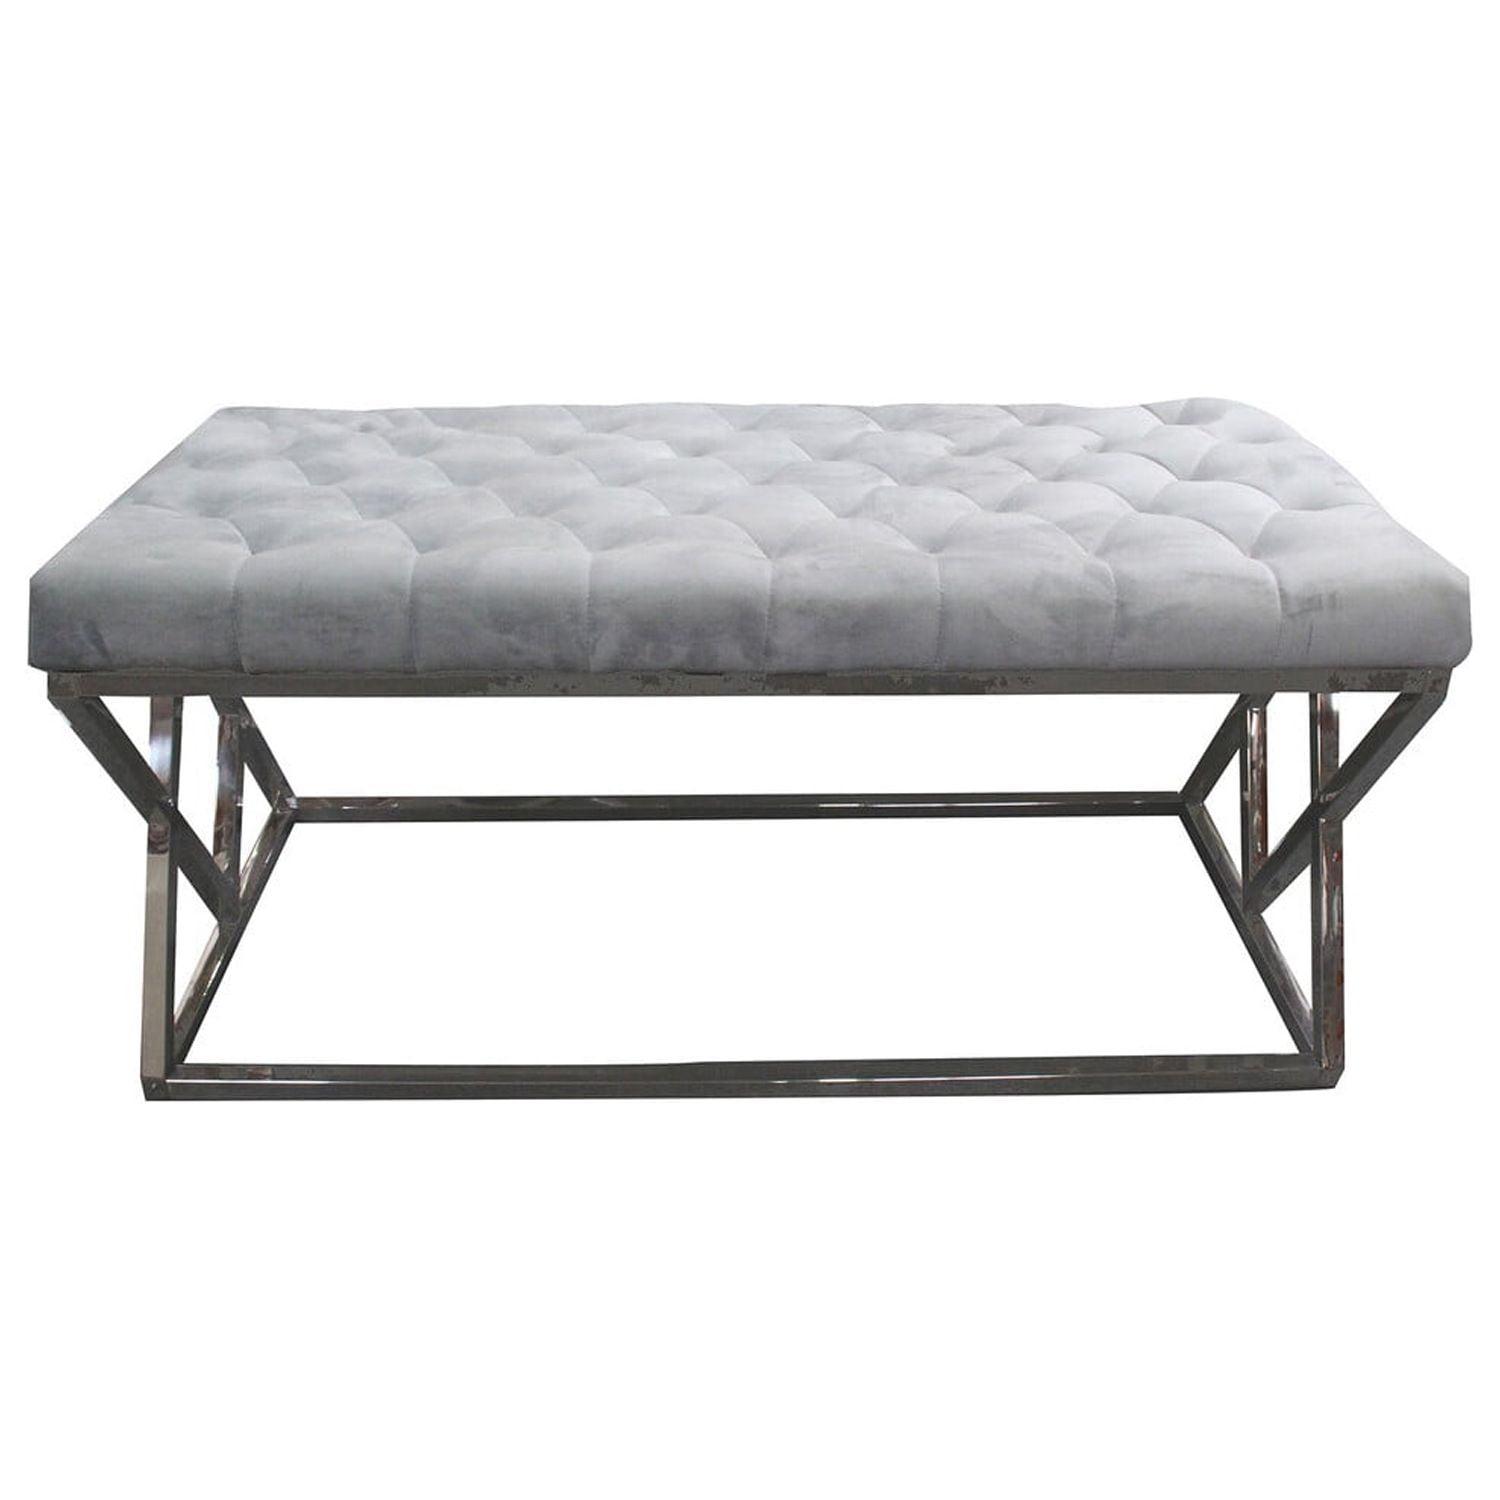 Contemporary Gray Velvet Tufted Bench with Stainless Steel Legs